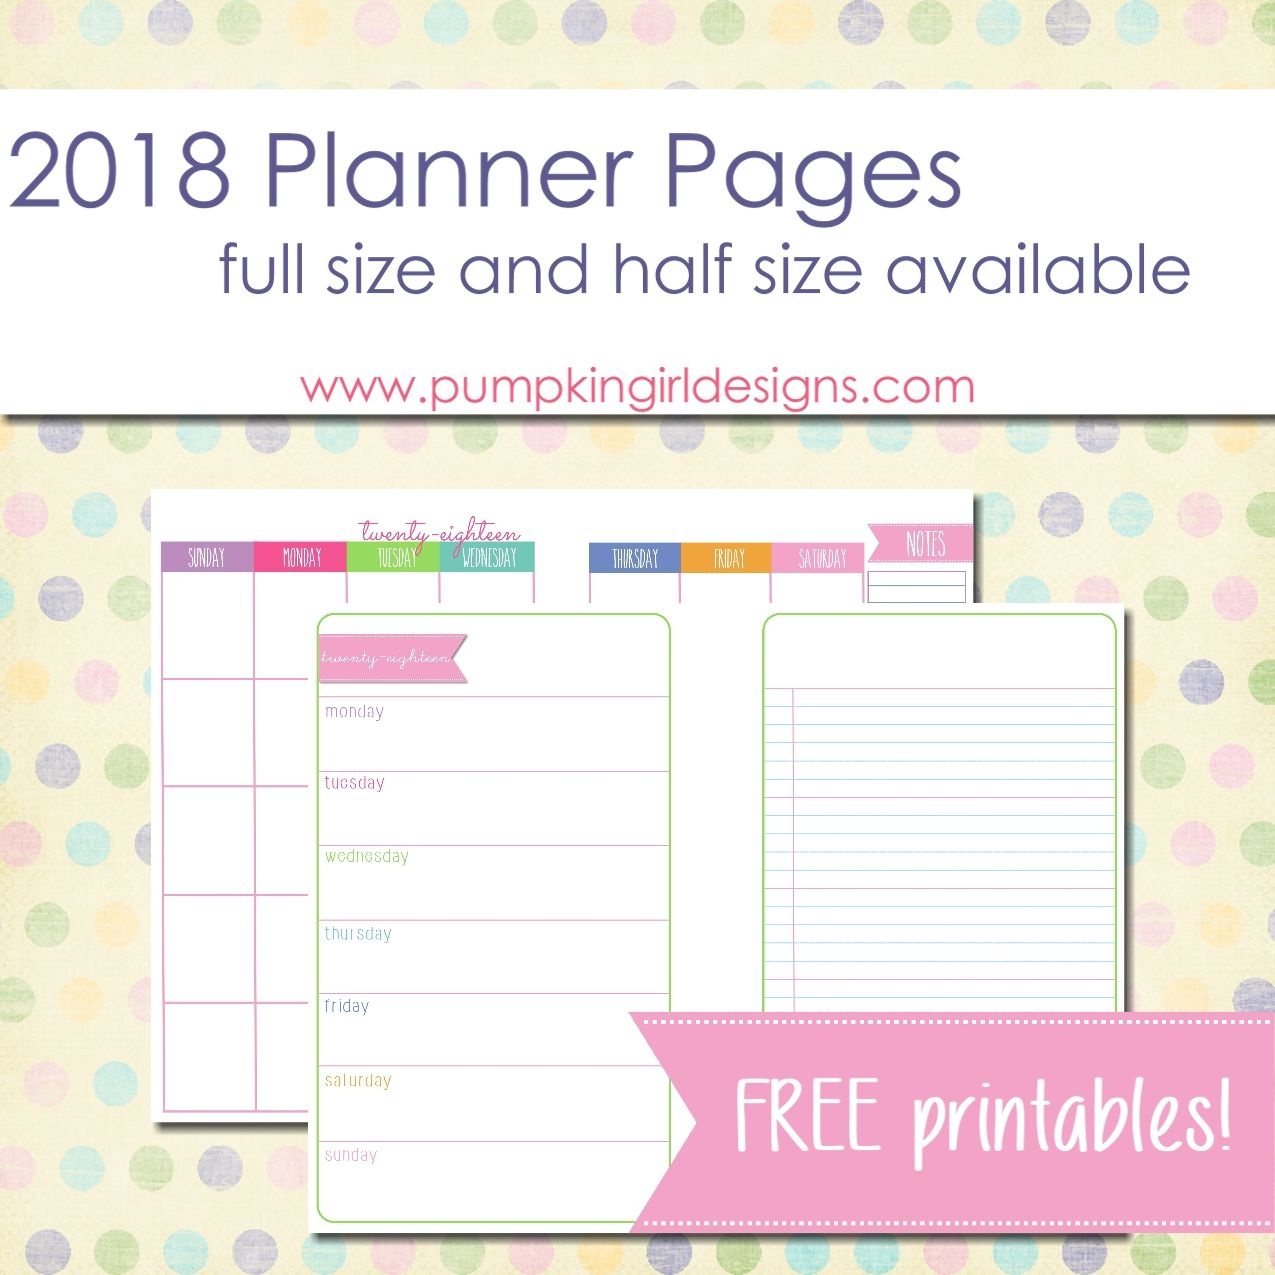 Free Printable 2018 Blank Planner Pages | Pumpkingirl Designs - Free Printable Diary Pages